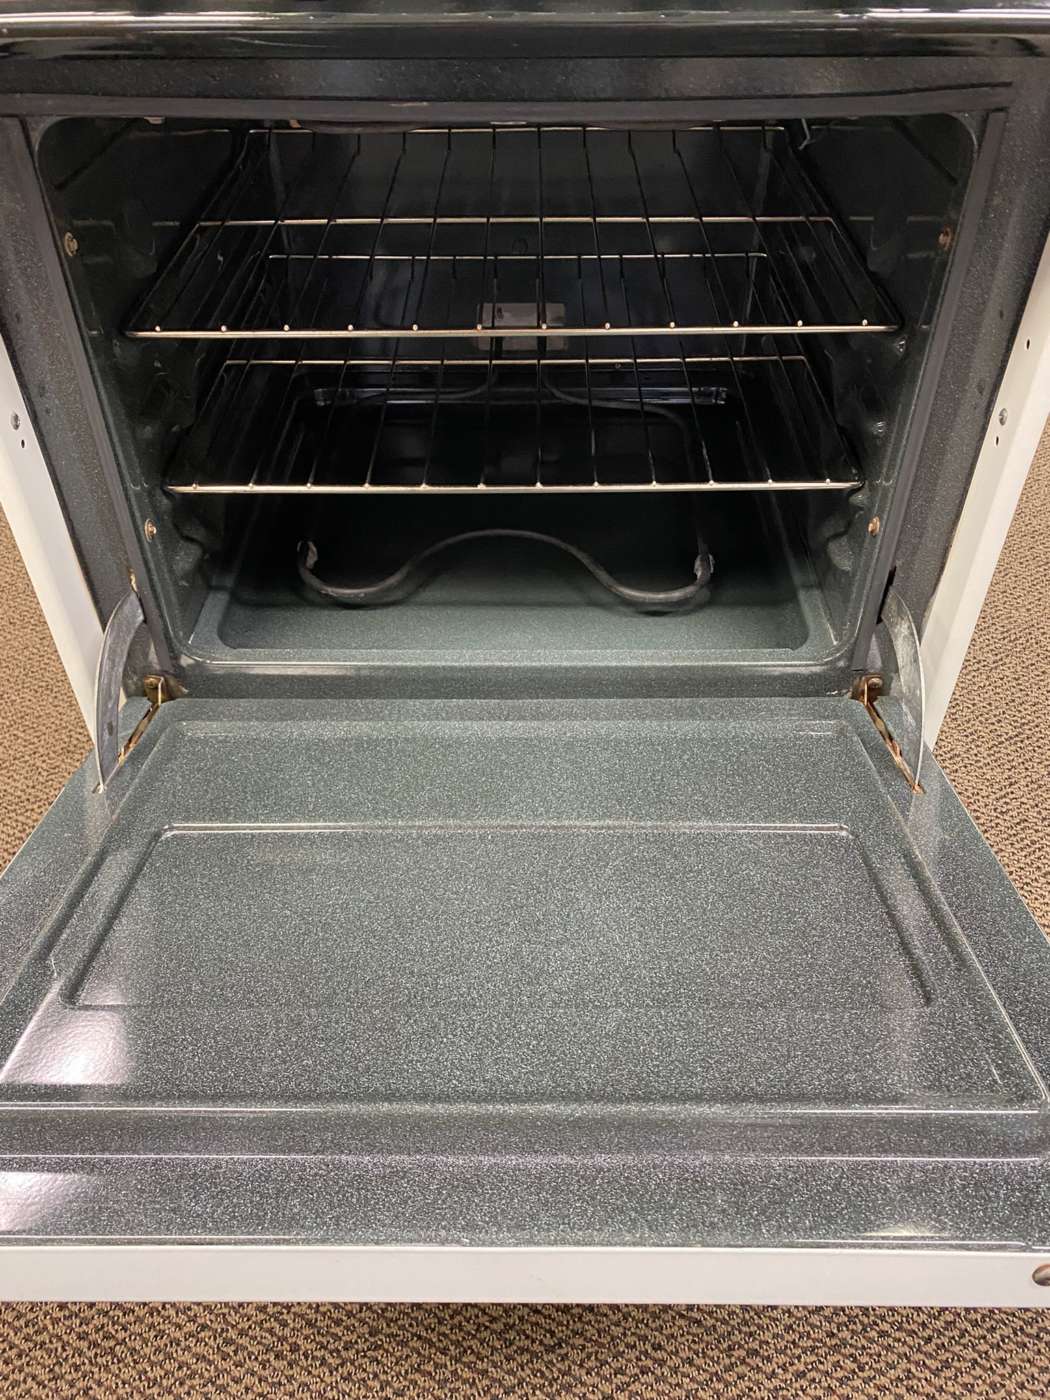 Reconditioned BROWN Standard-Oven Electric Range - White - Howie Voigt